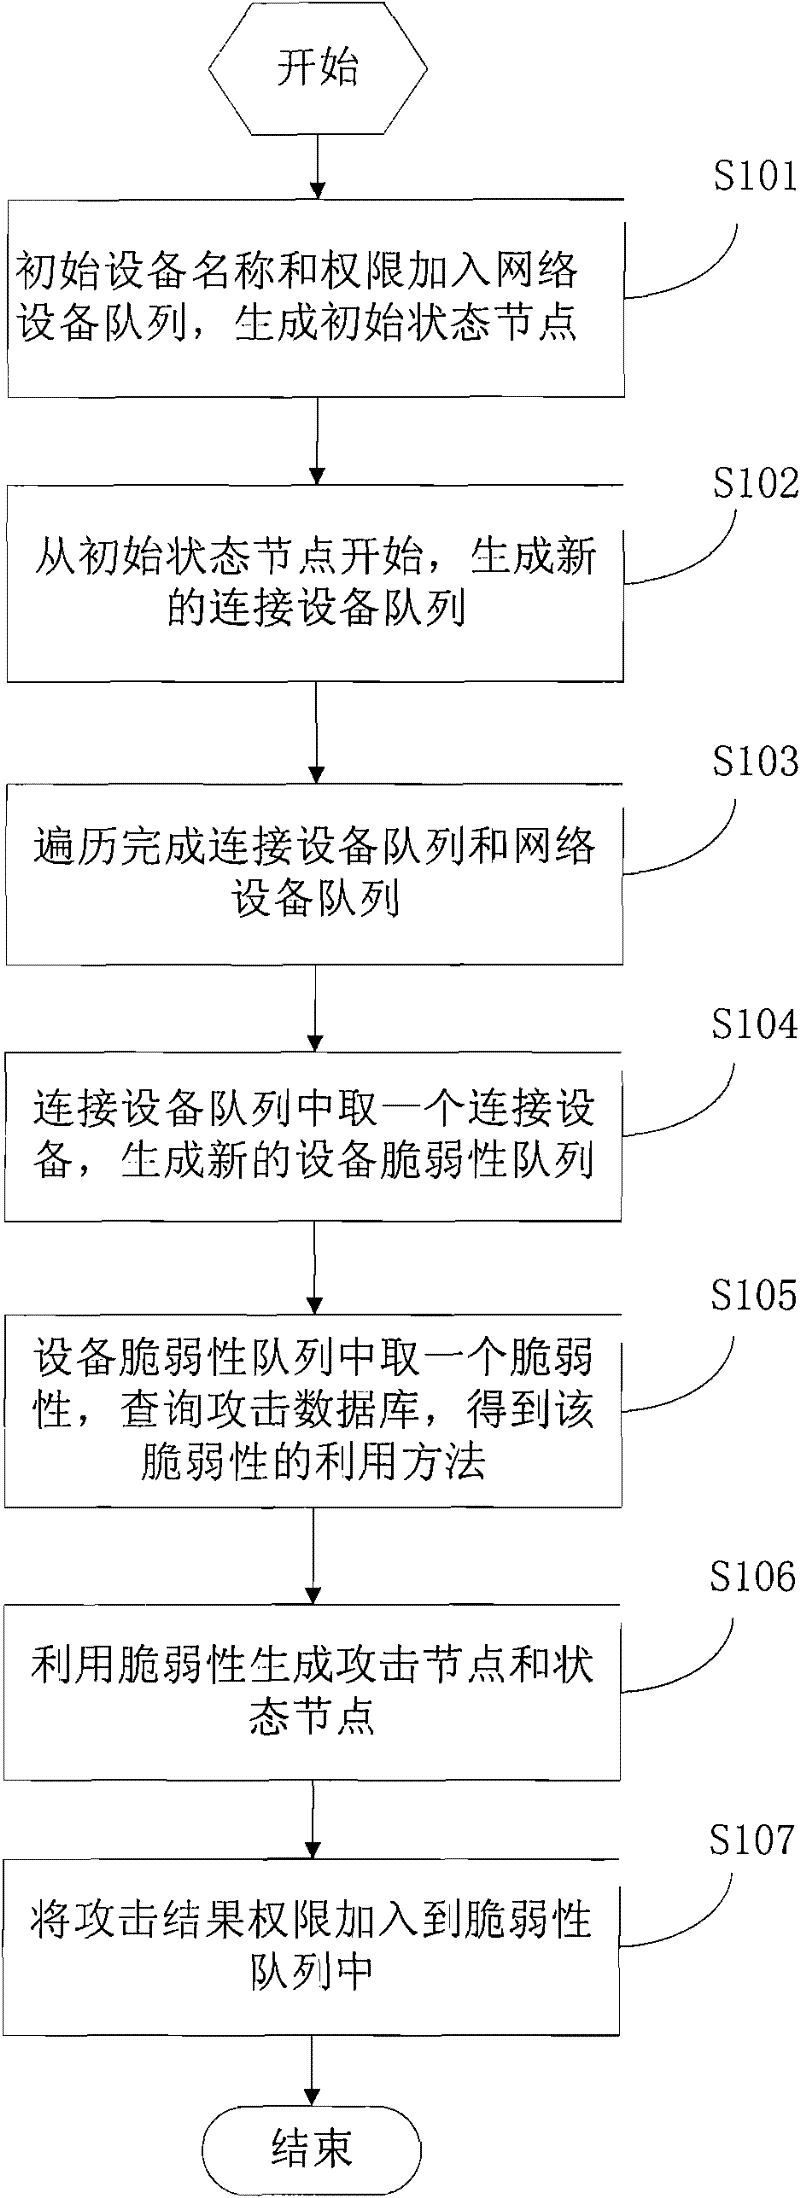 Method and system for detecting network security